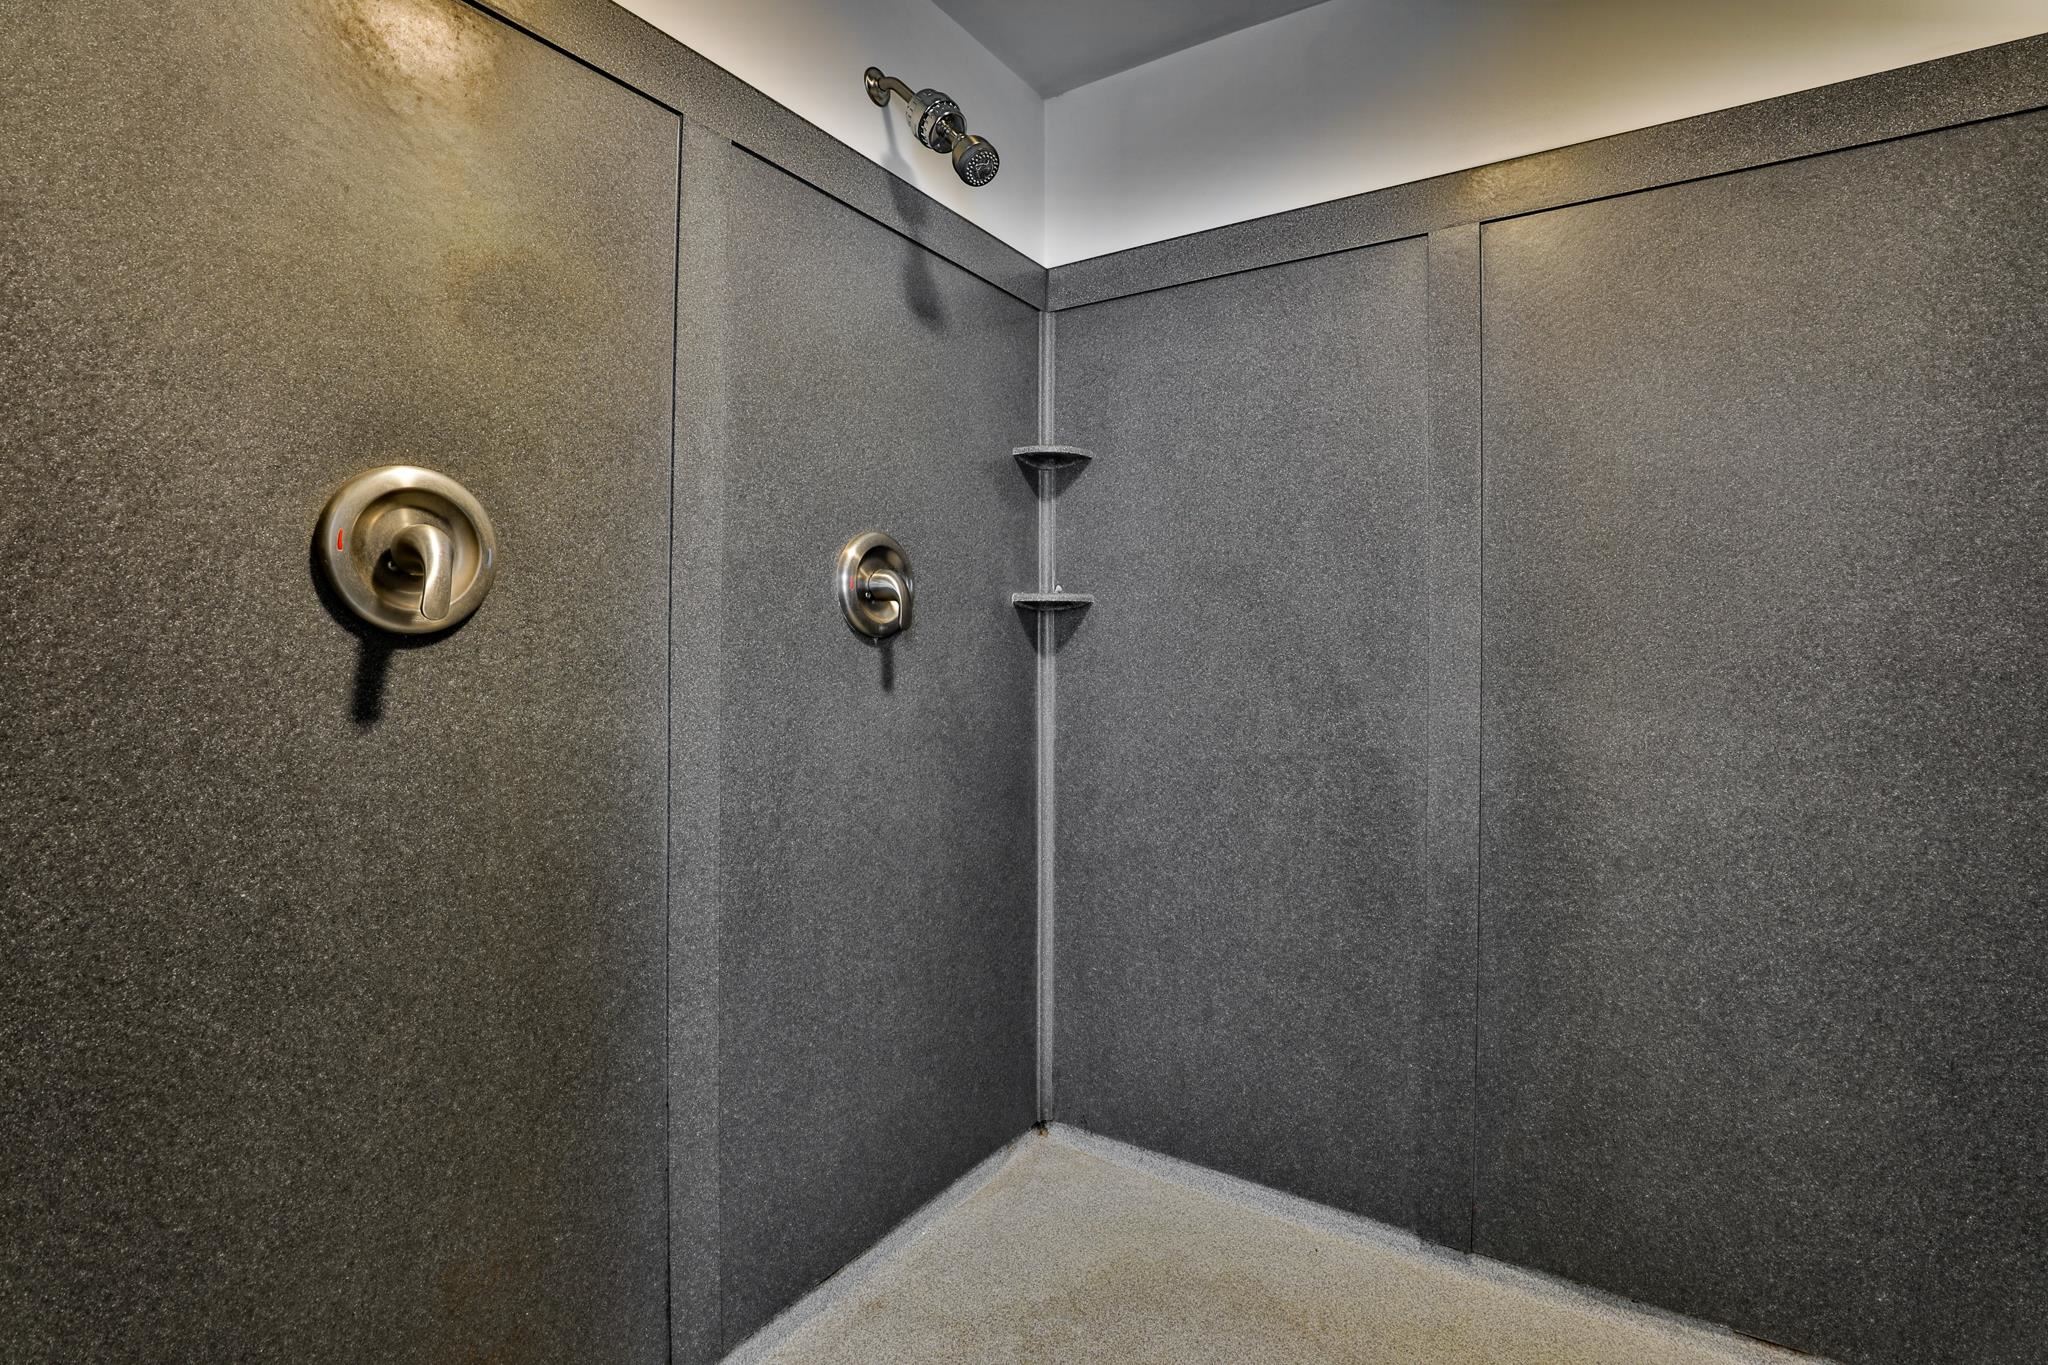 Two shower heads with a headed floor makes showering relaxing.